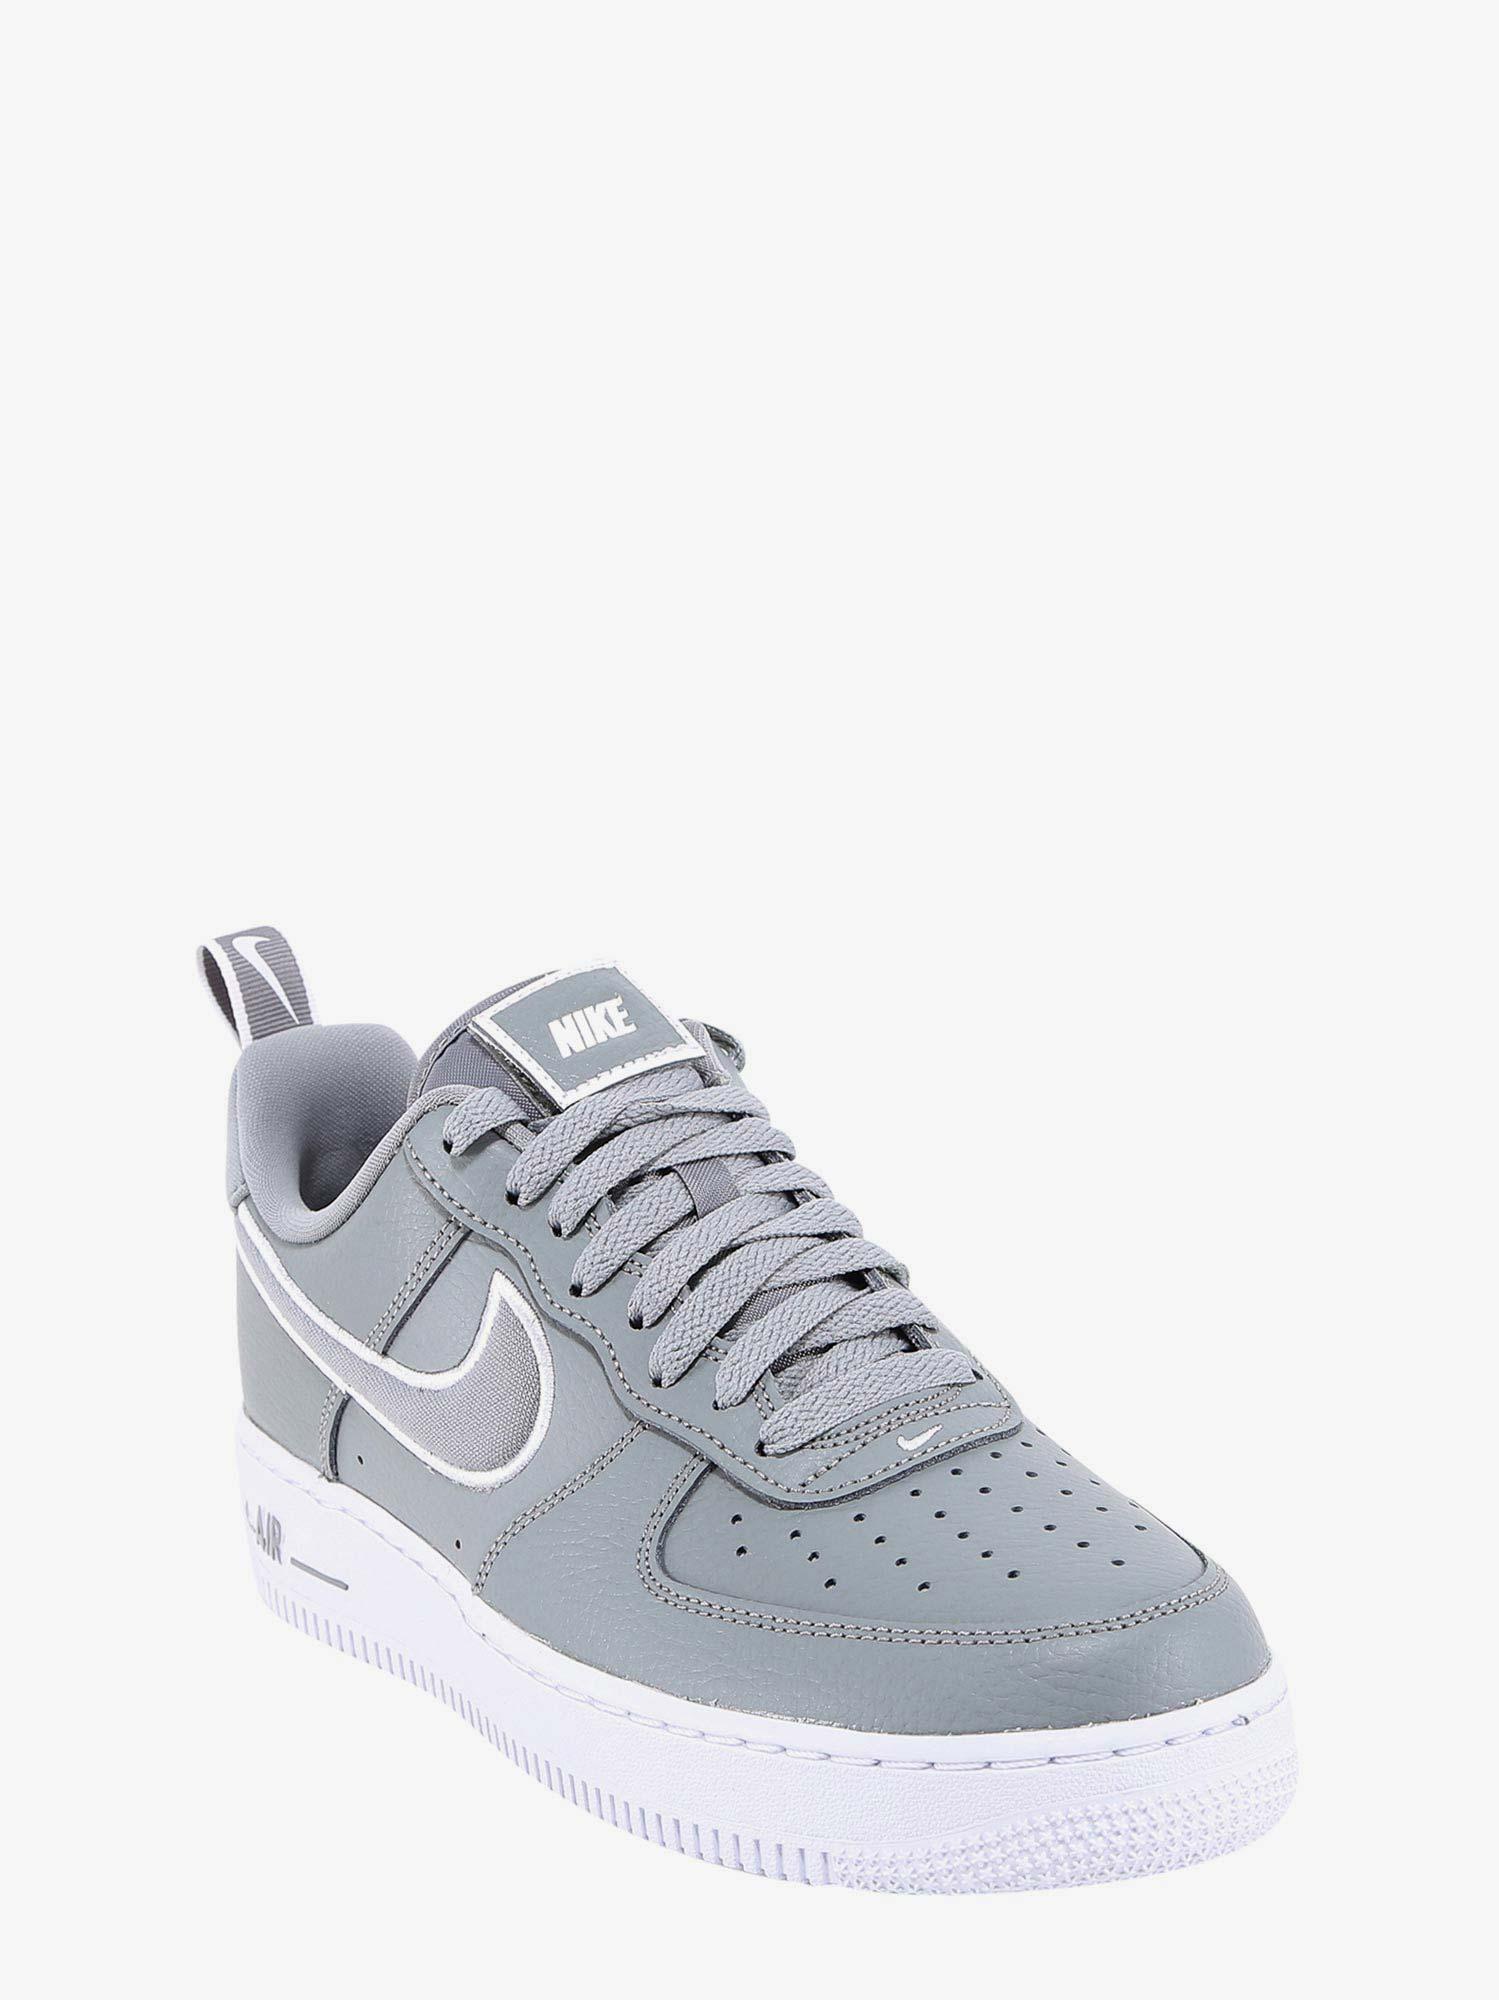 Nike Air Force 1 in Grey (Gray) for Men - Lyst